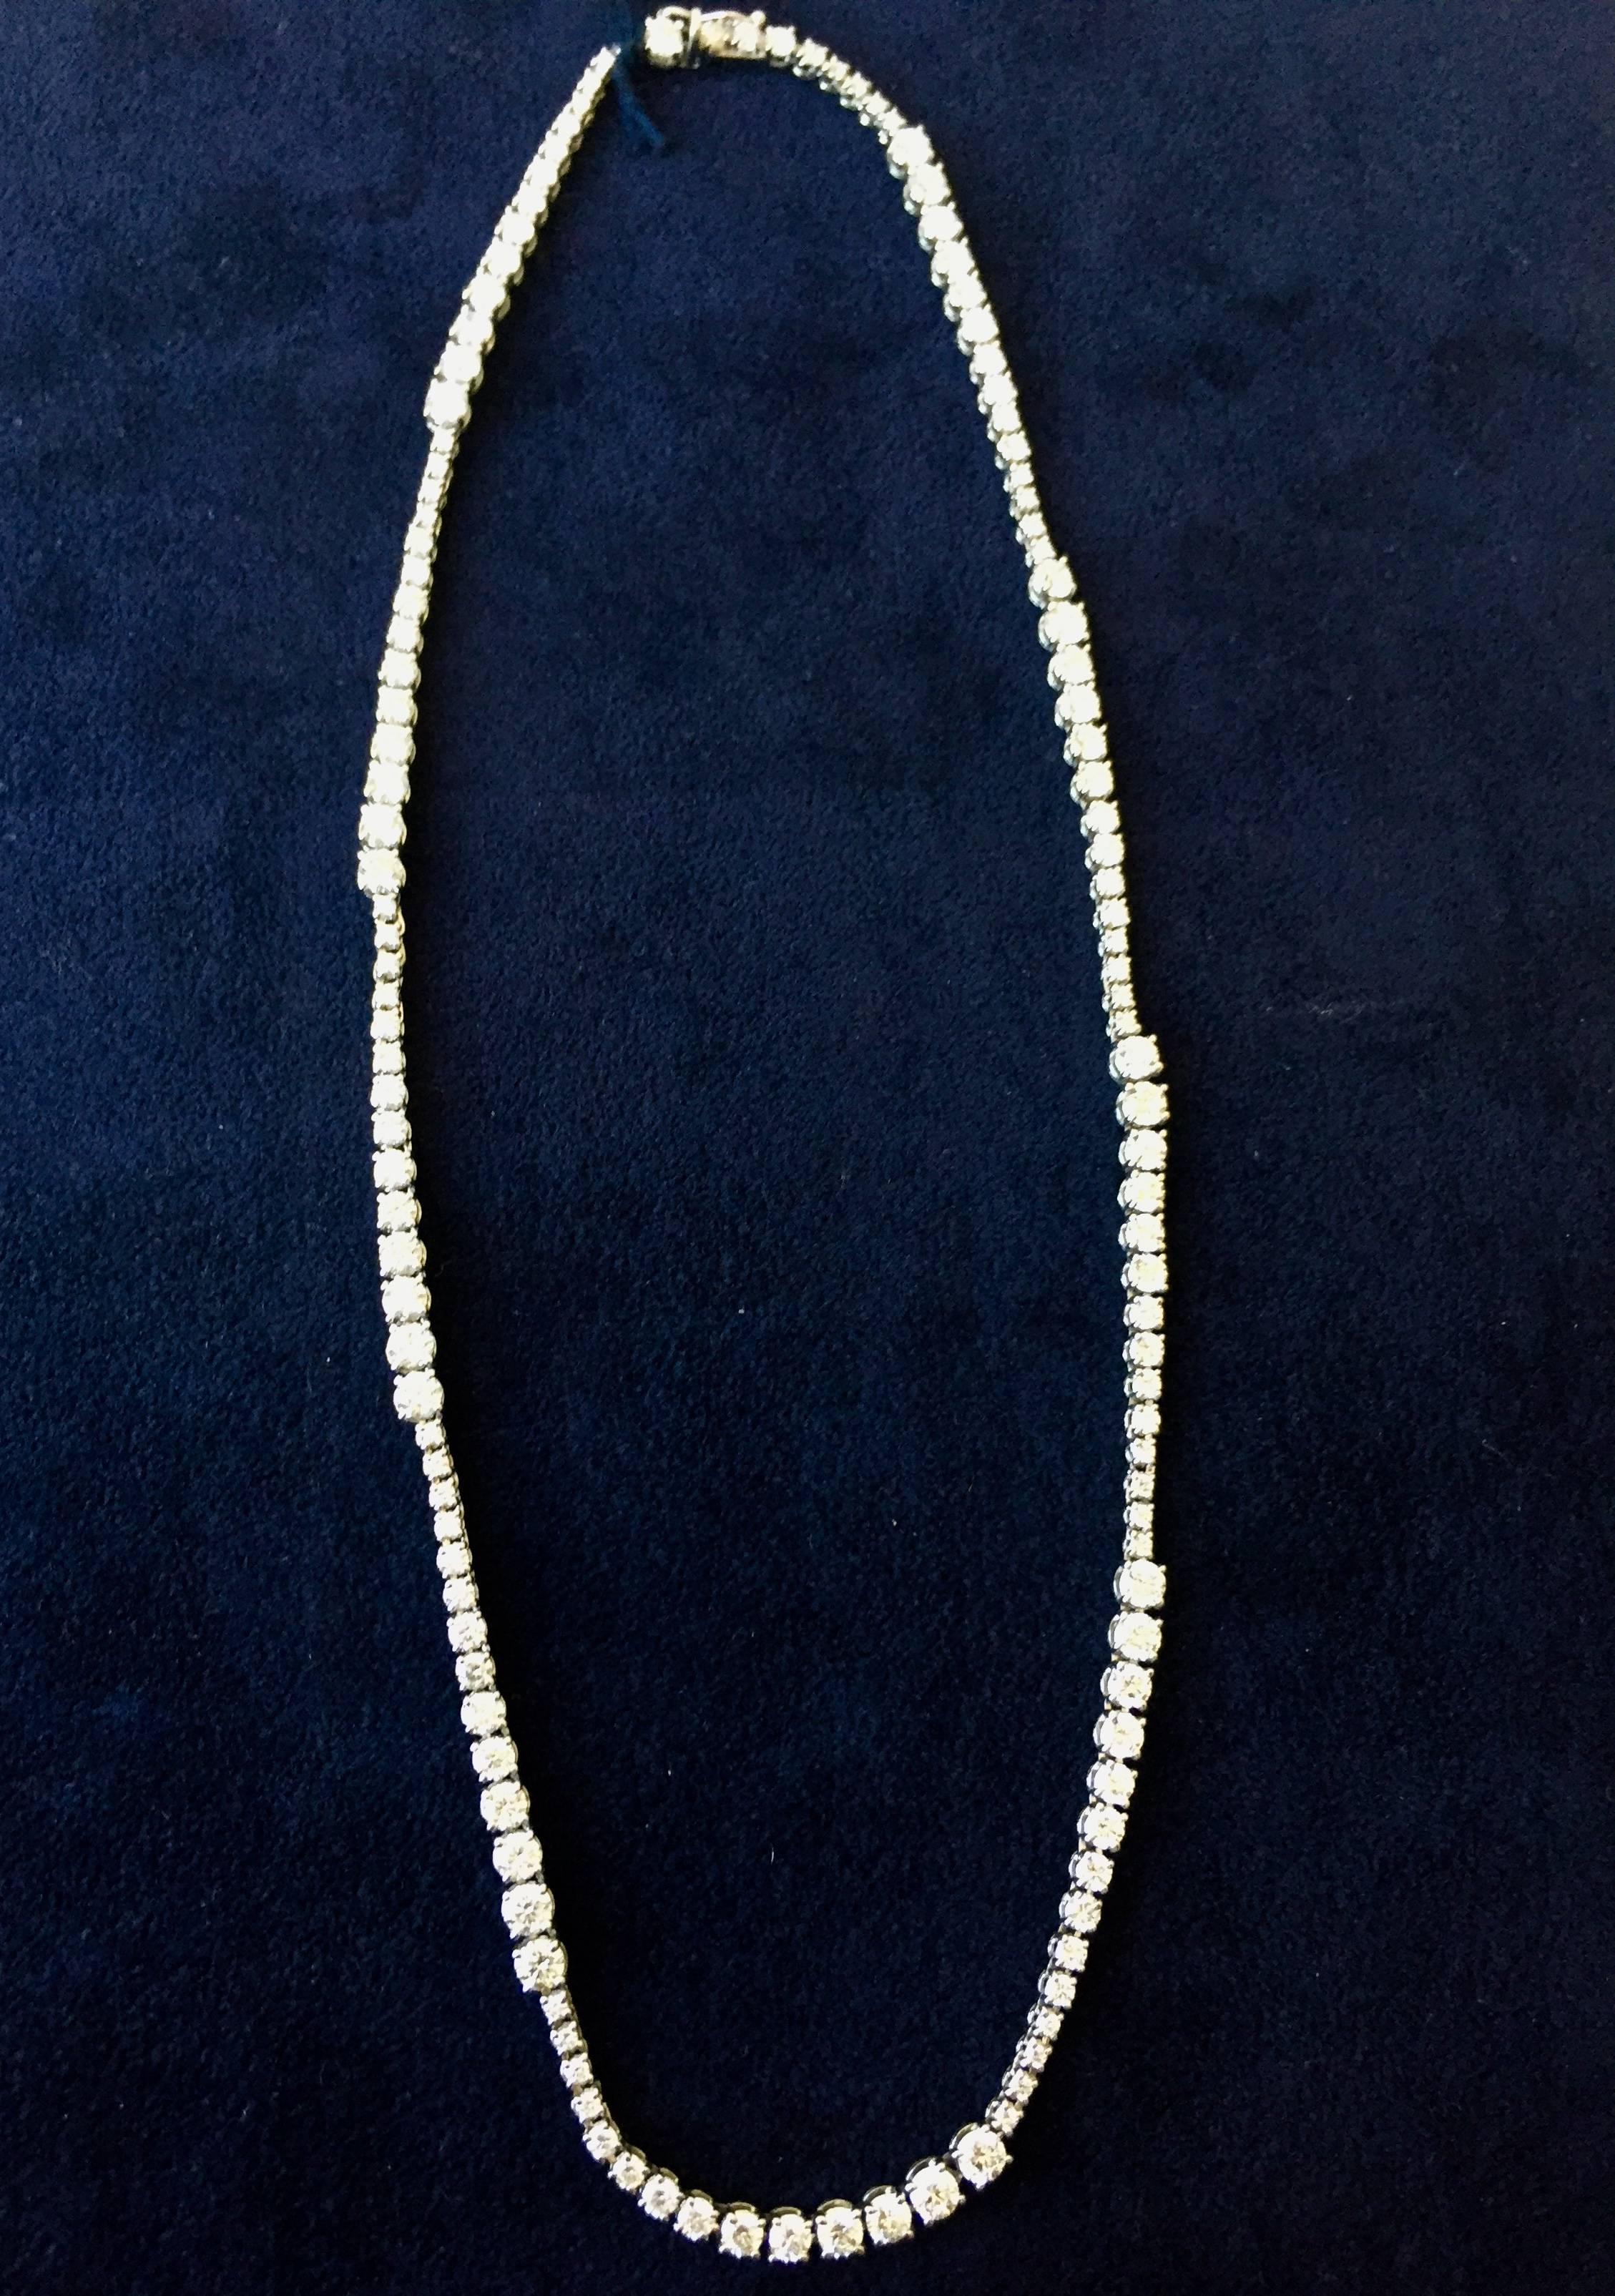 This stunning graduated necklace is manufactured in Italy, it consists of sections of graduated stones. Set in 14K white gold, with excellent-cut round diamonds. The color of the stones are G and the clarity is SI1 to SI2. The weight of the necklace